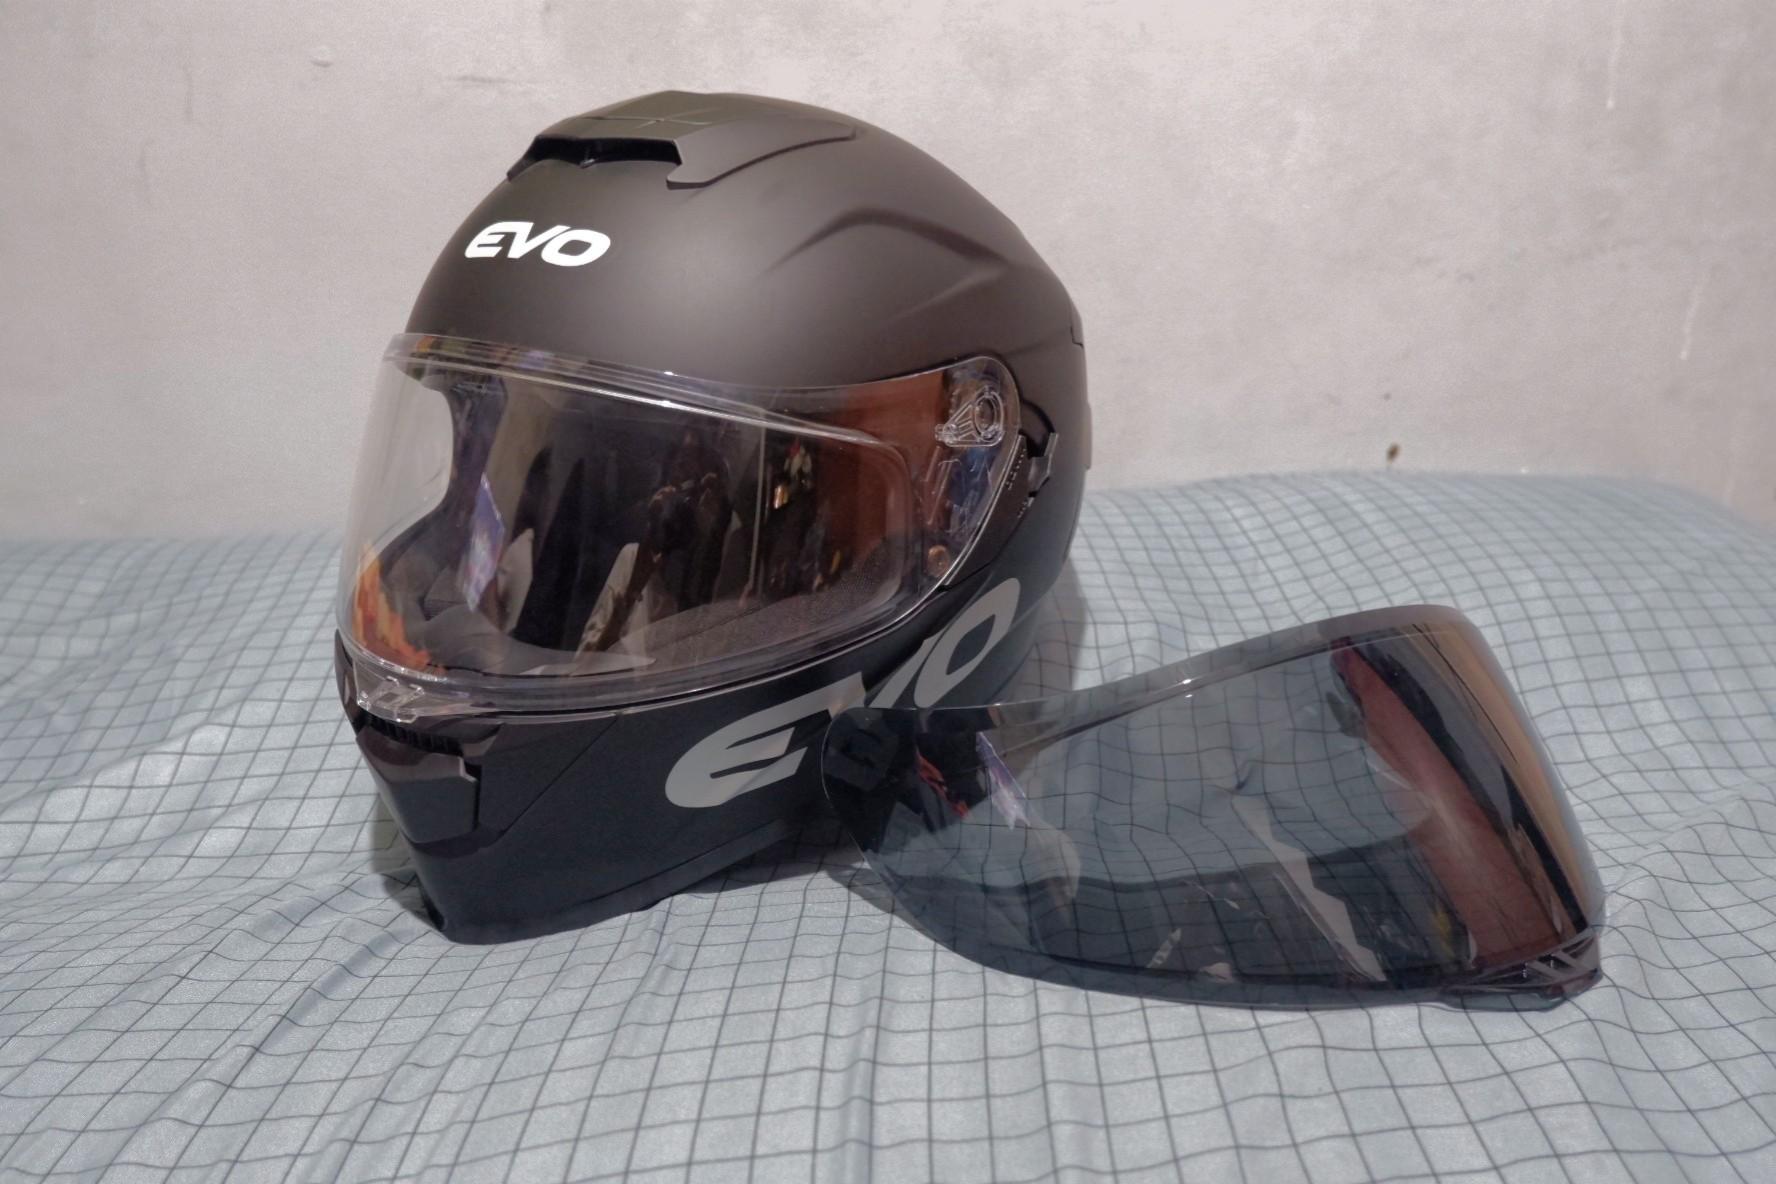 Full Face Helmet Matte Black Evo Gt Pro With Box And Freebies Motorbikes Motorbike Parts Accessories Helmets And Other Riding Gears On Carousell